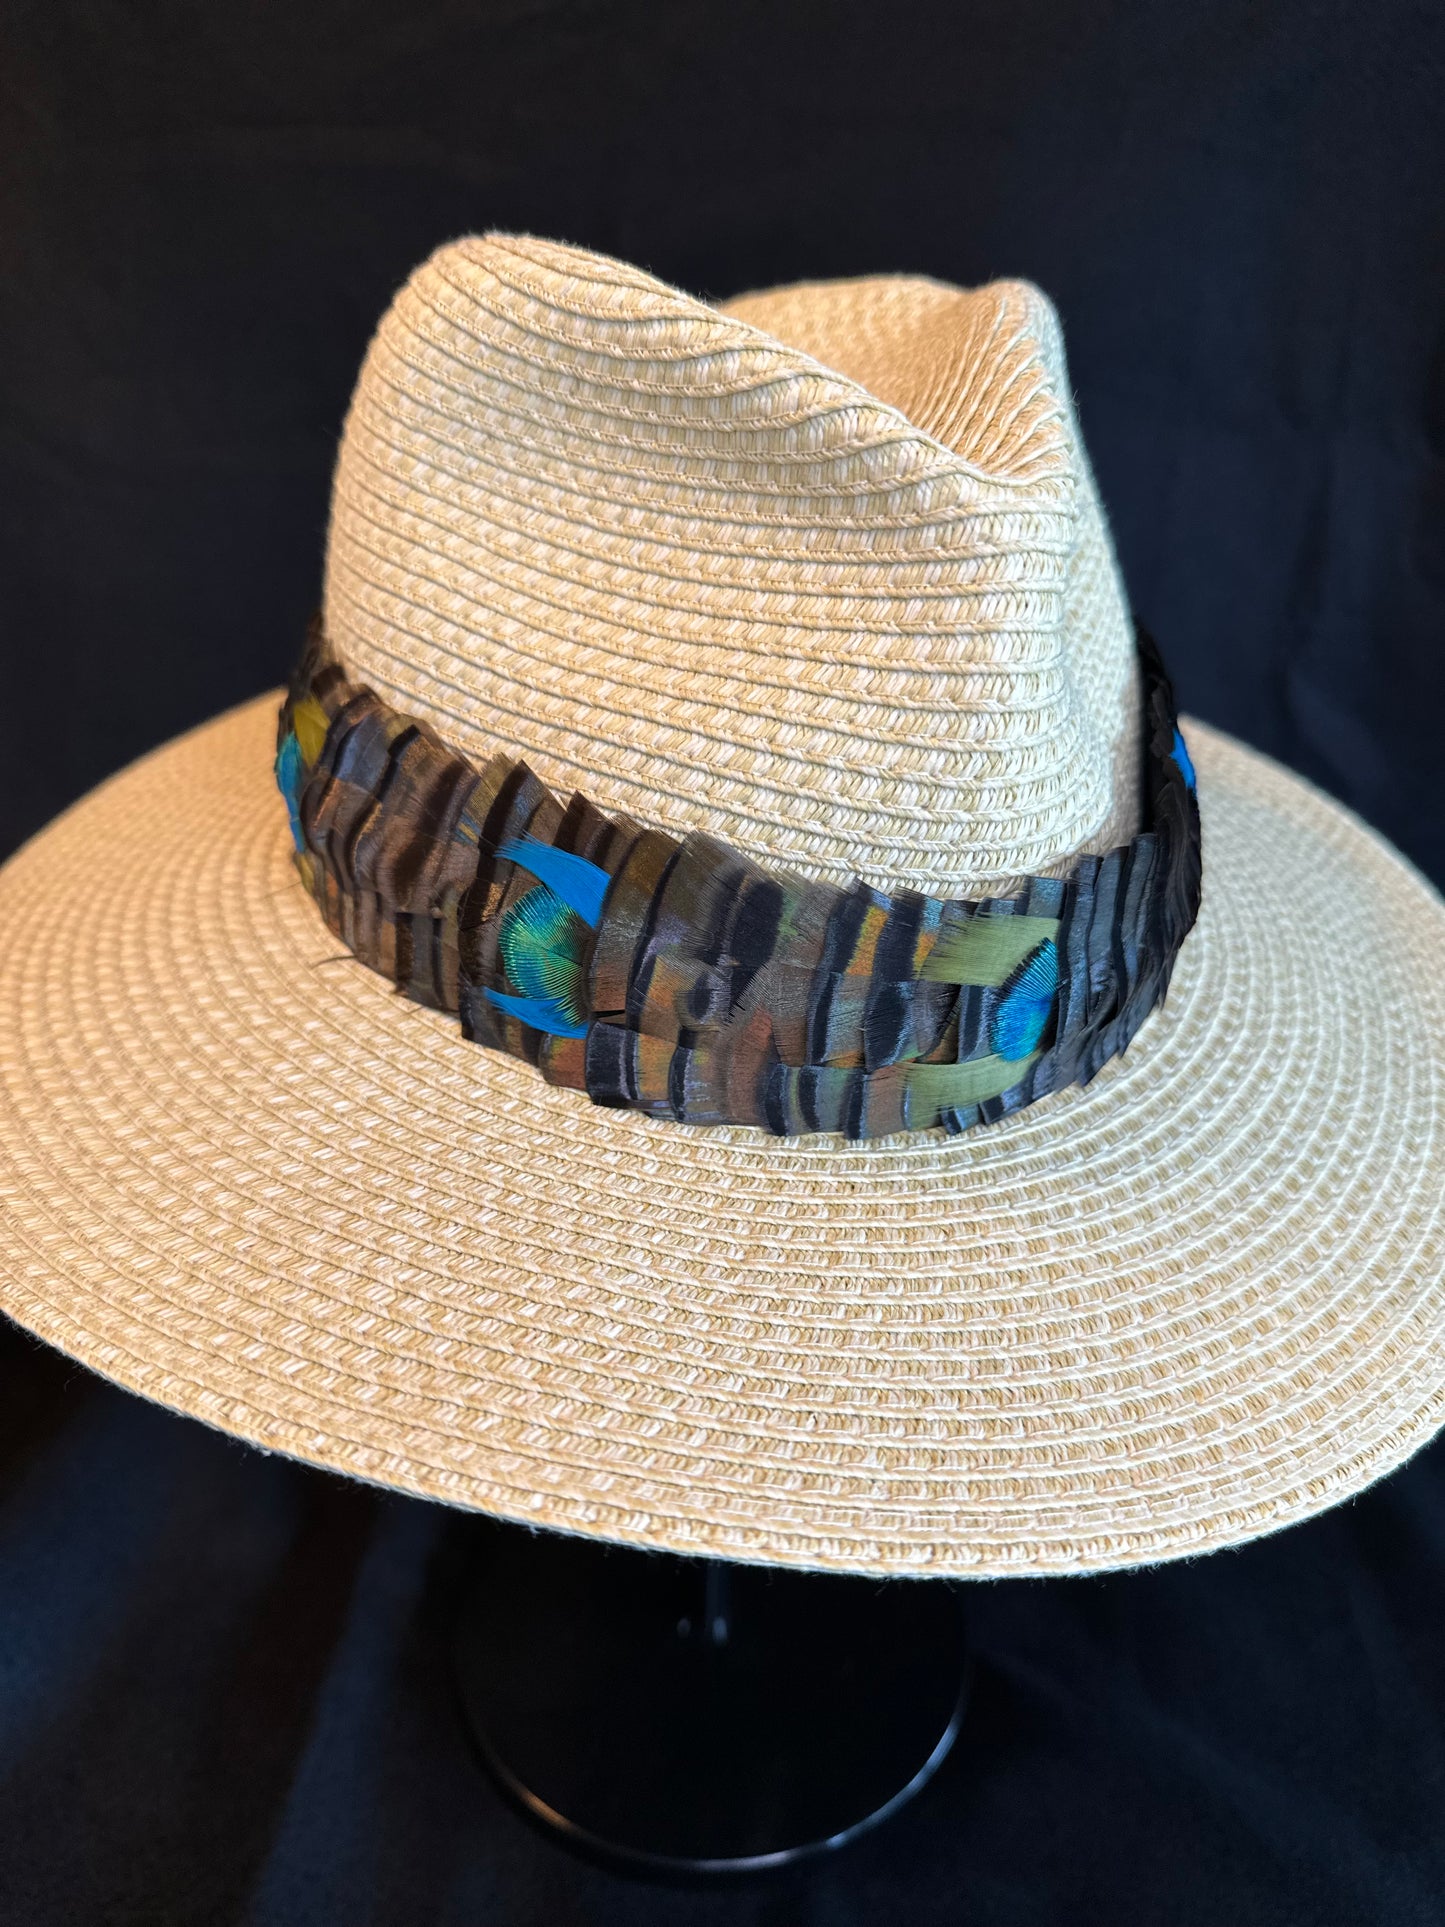 Turkey with Blue Peacock "penny" accents humu papale (feather hat band)